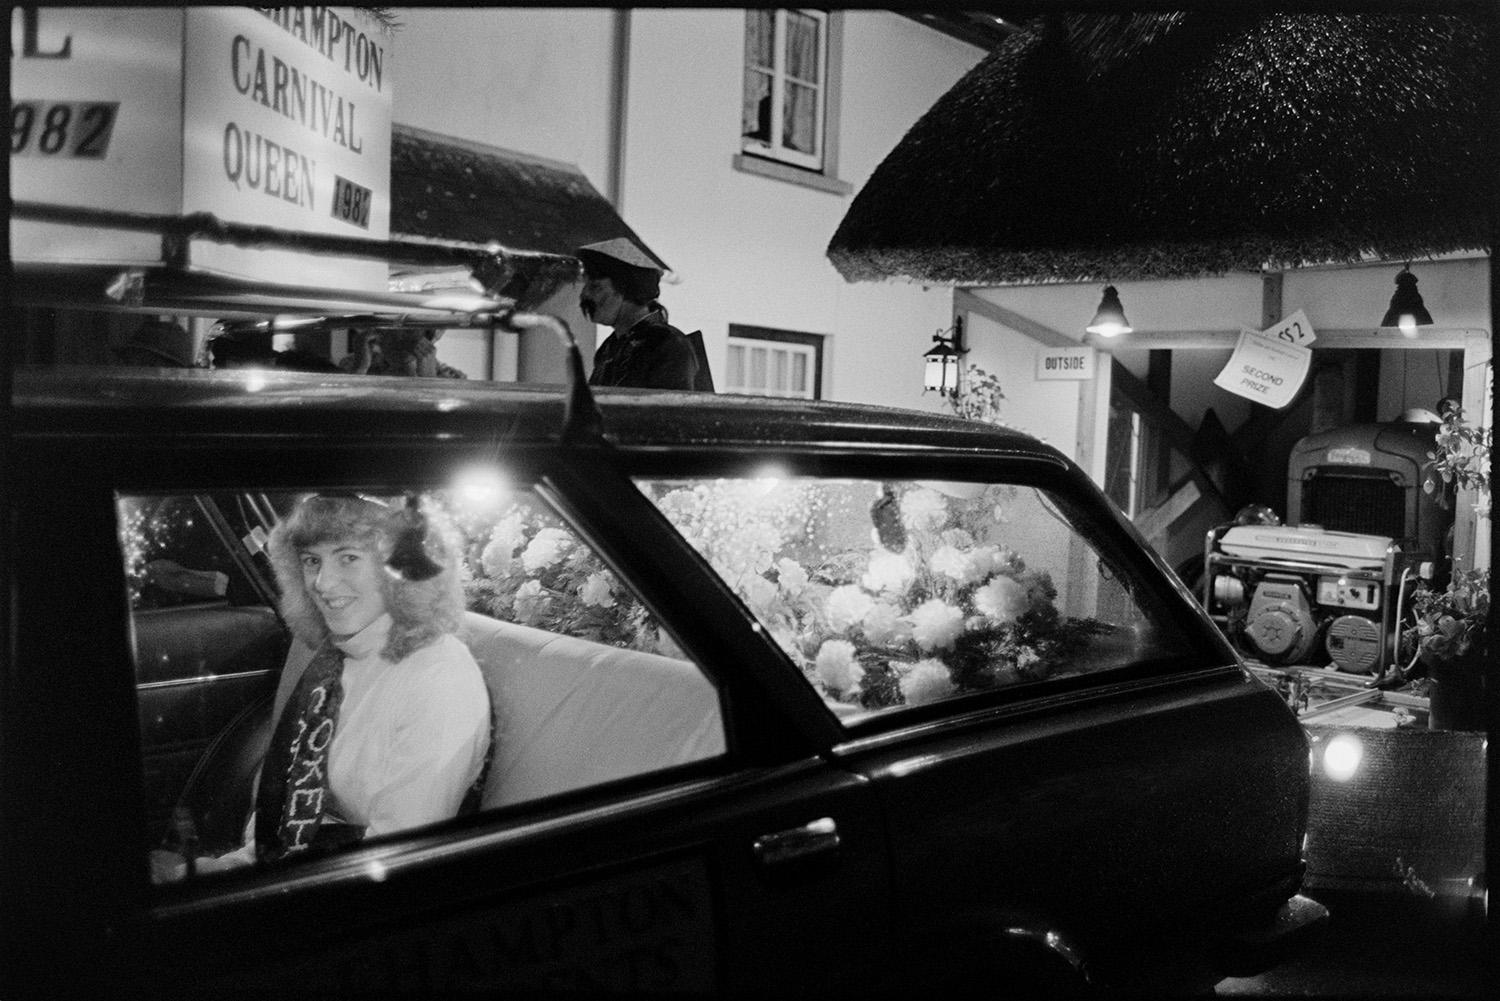 Carnival parade at night, floats flaming torches, Queen in car. 
[The Okehampton carnival Queen in a car with flower arrangement son the parcel shelf, at Dolton Carnival. A thatched garage can be seen in the background.]